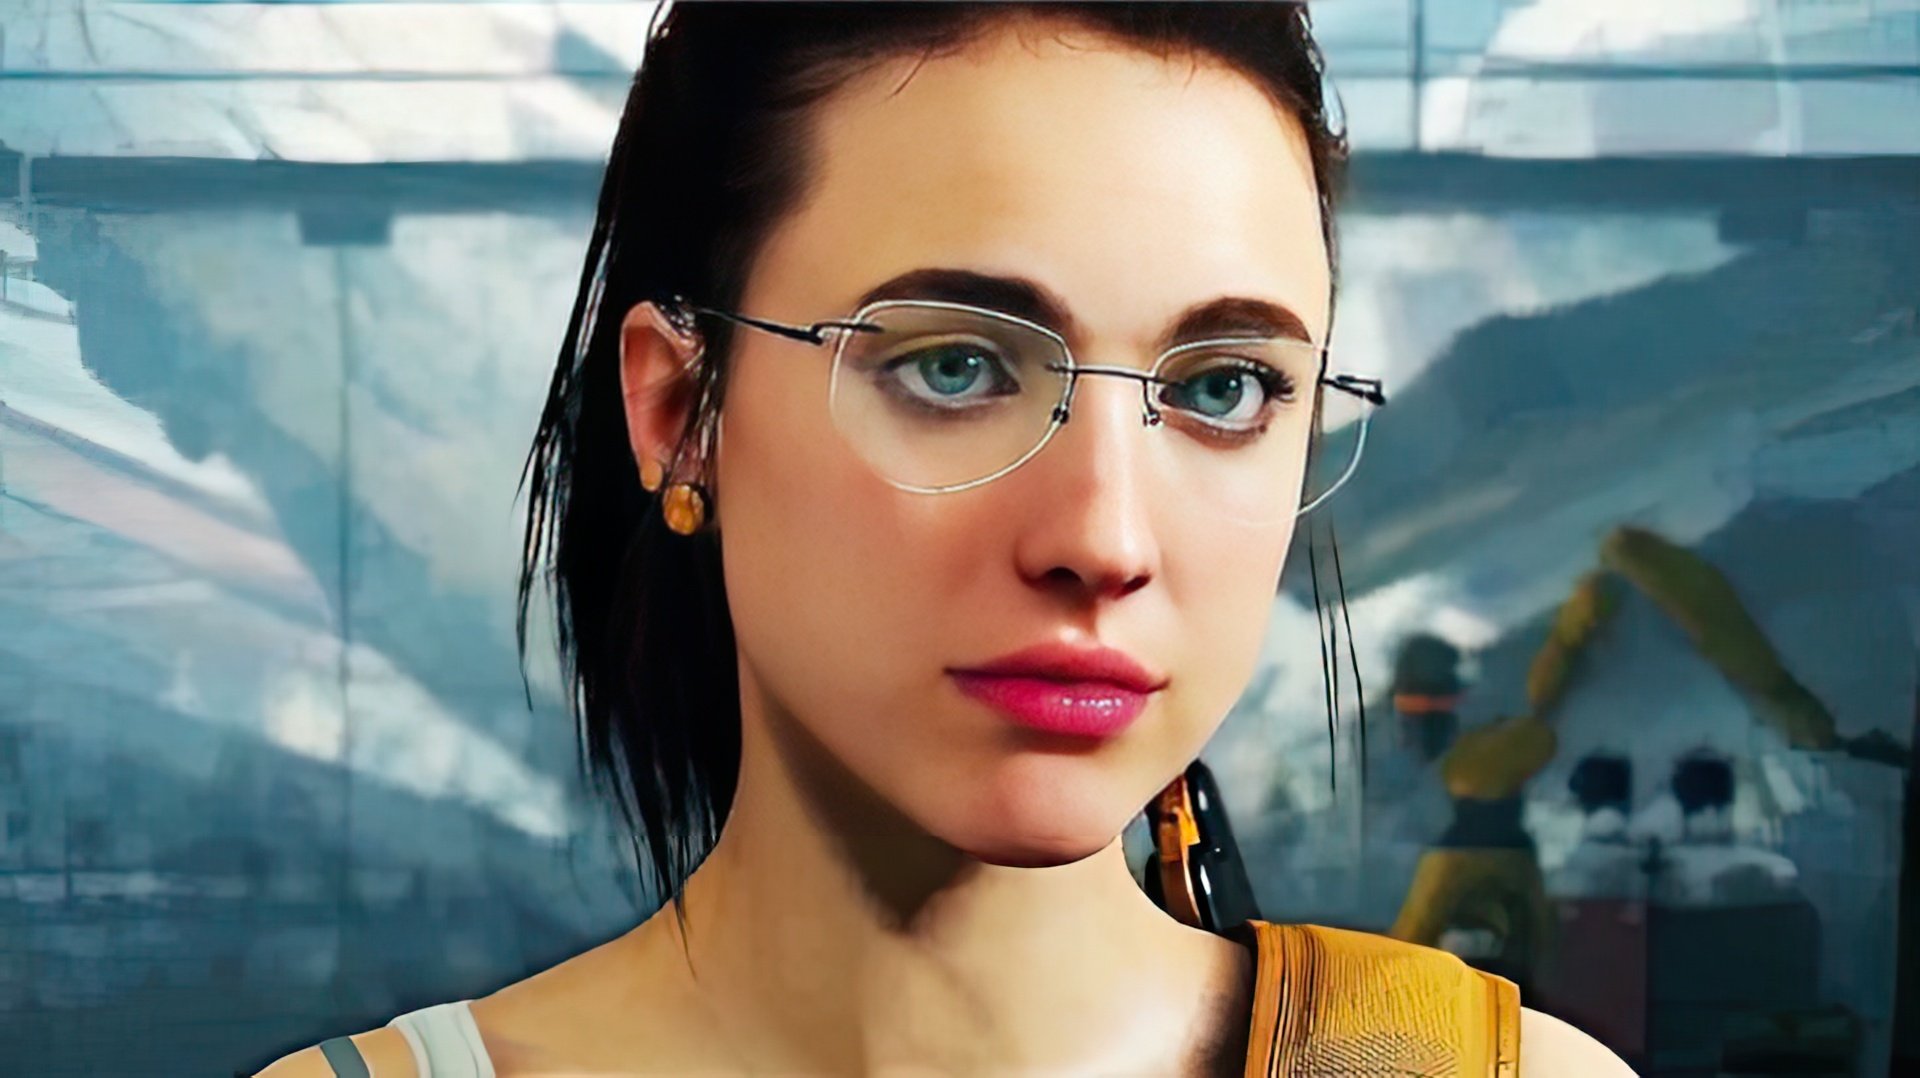 Margaret Qualley worked on the computer game Death Stranding